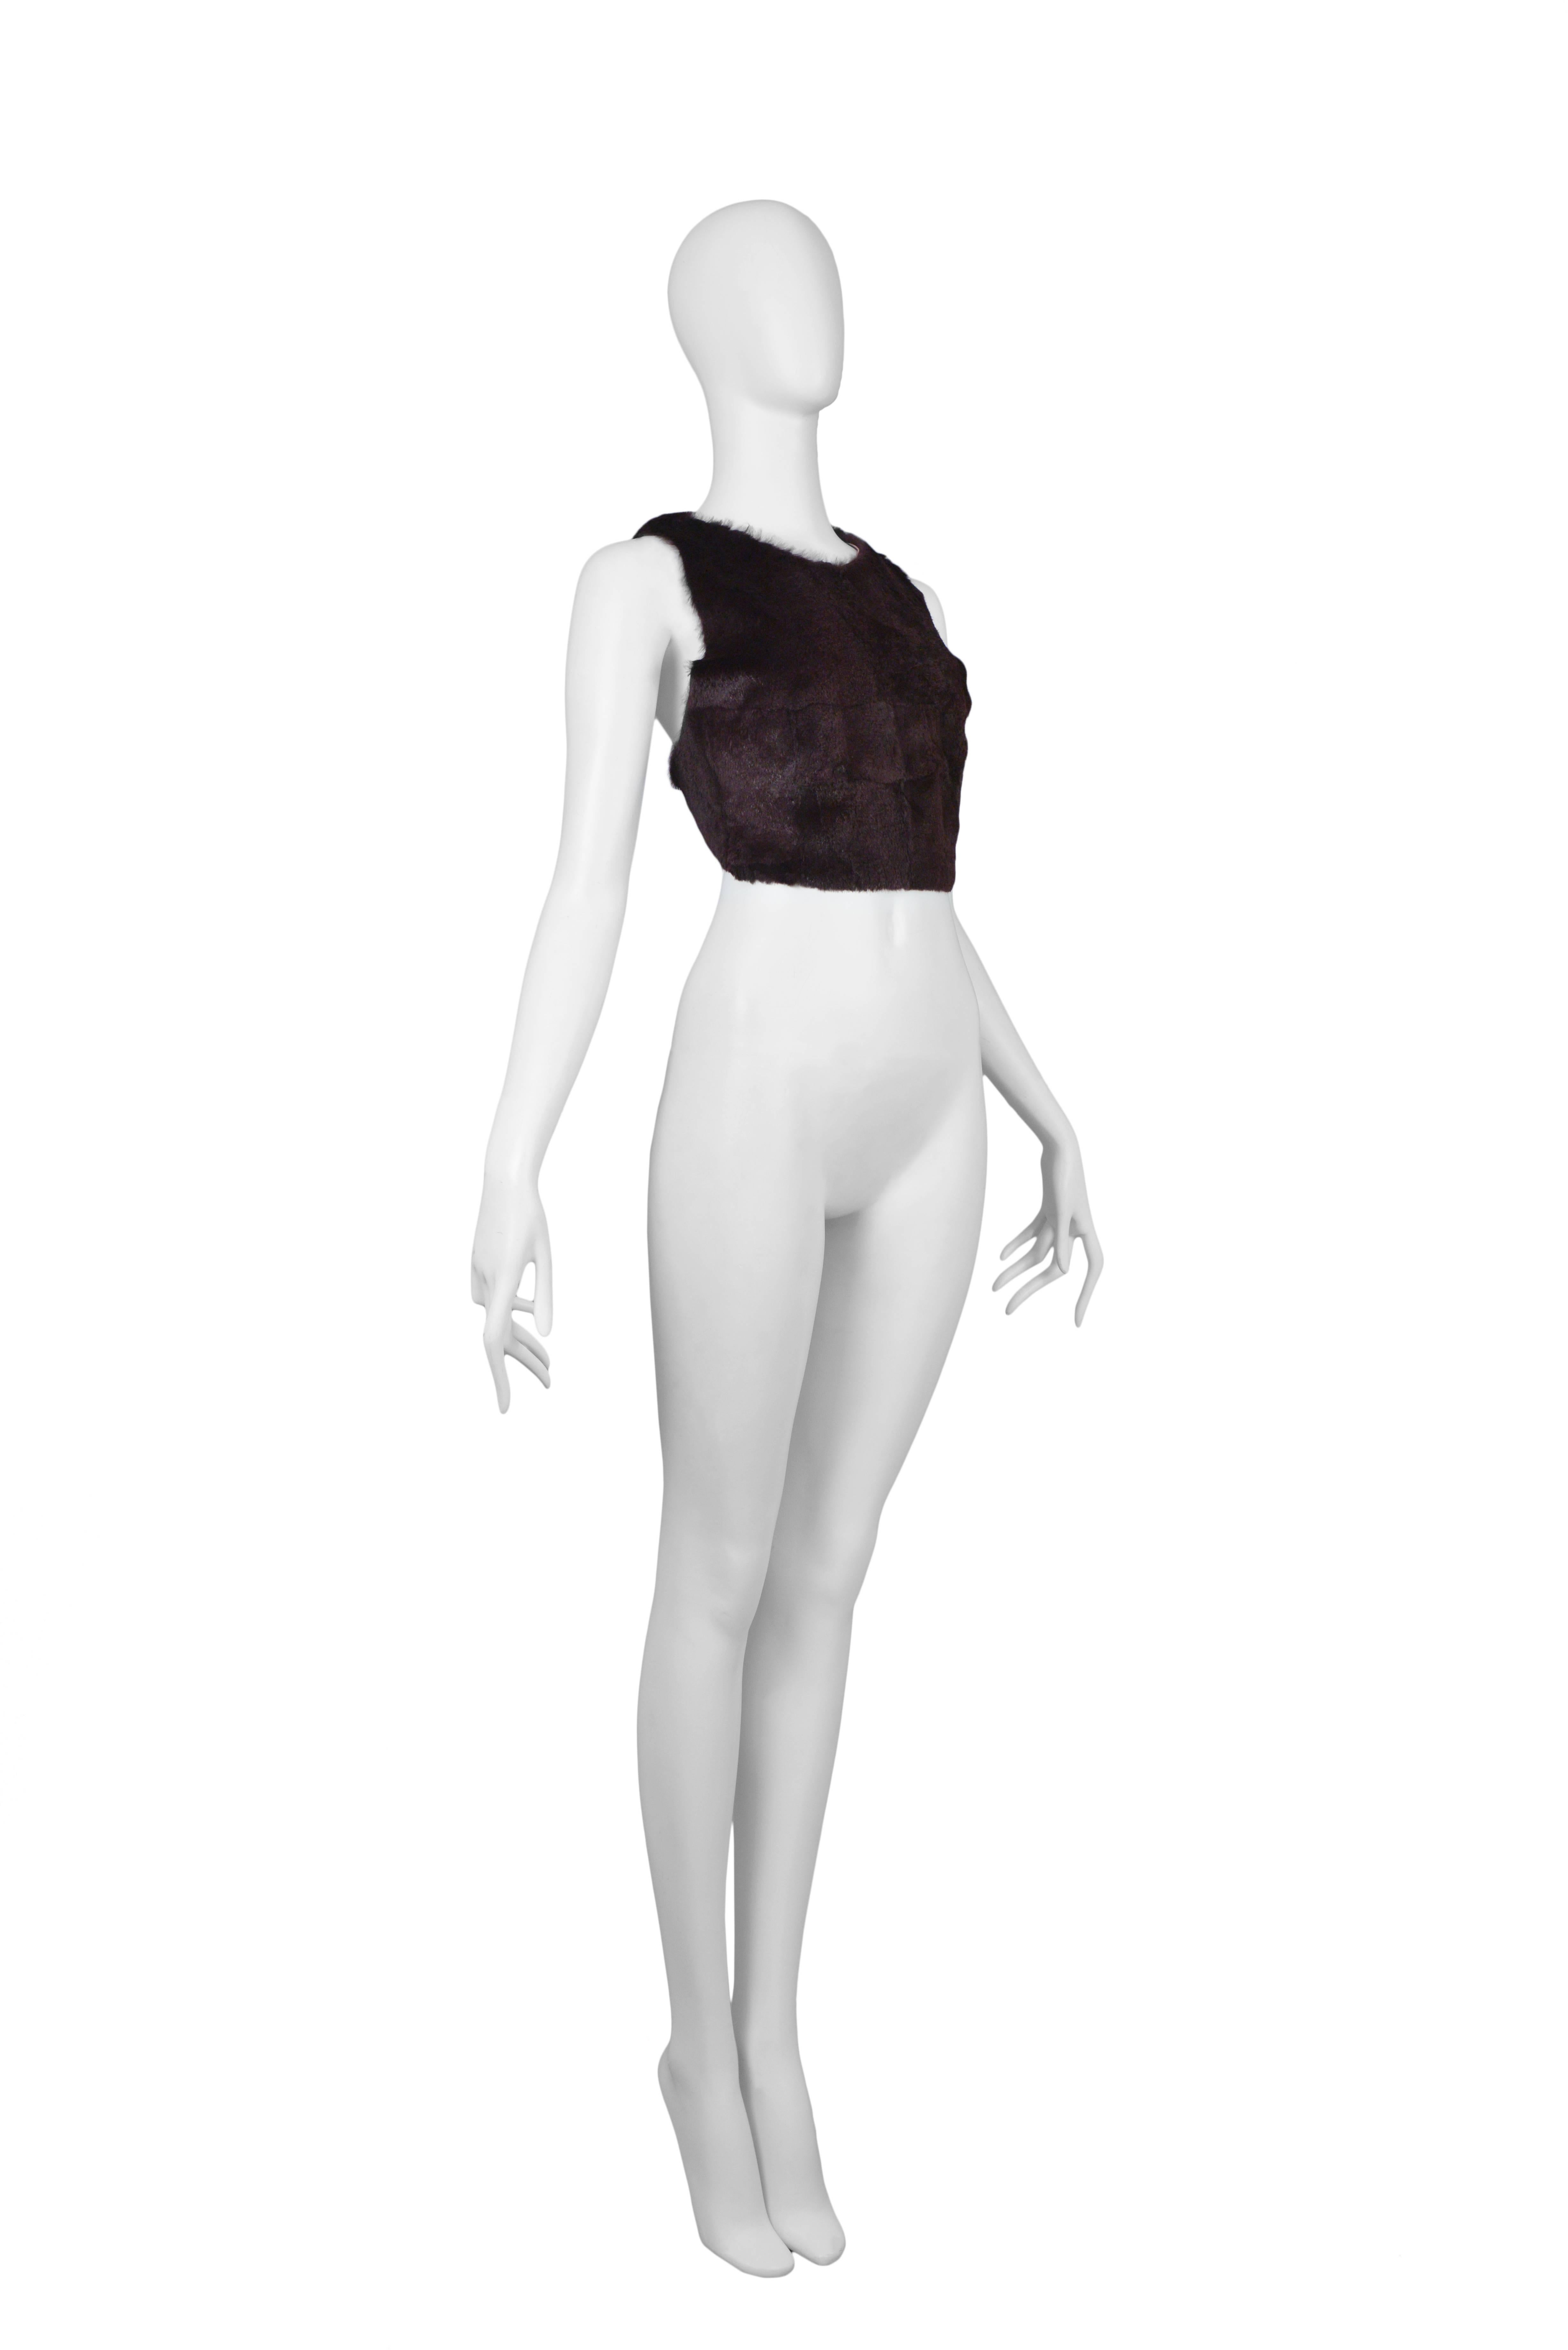 Vintage Maison Martin Margiela burgundy fur cropped apron halter top made with genuine leather featuring adjustable elastic straps that criss cross at the back. 
Please inquire for additional images.